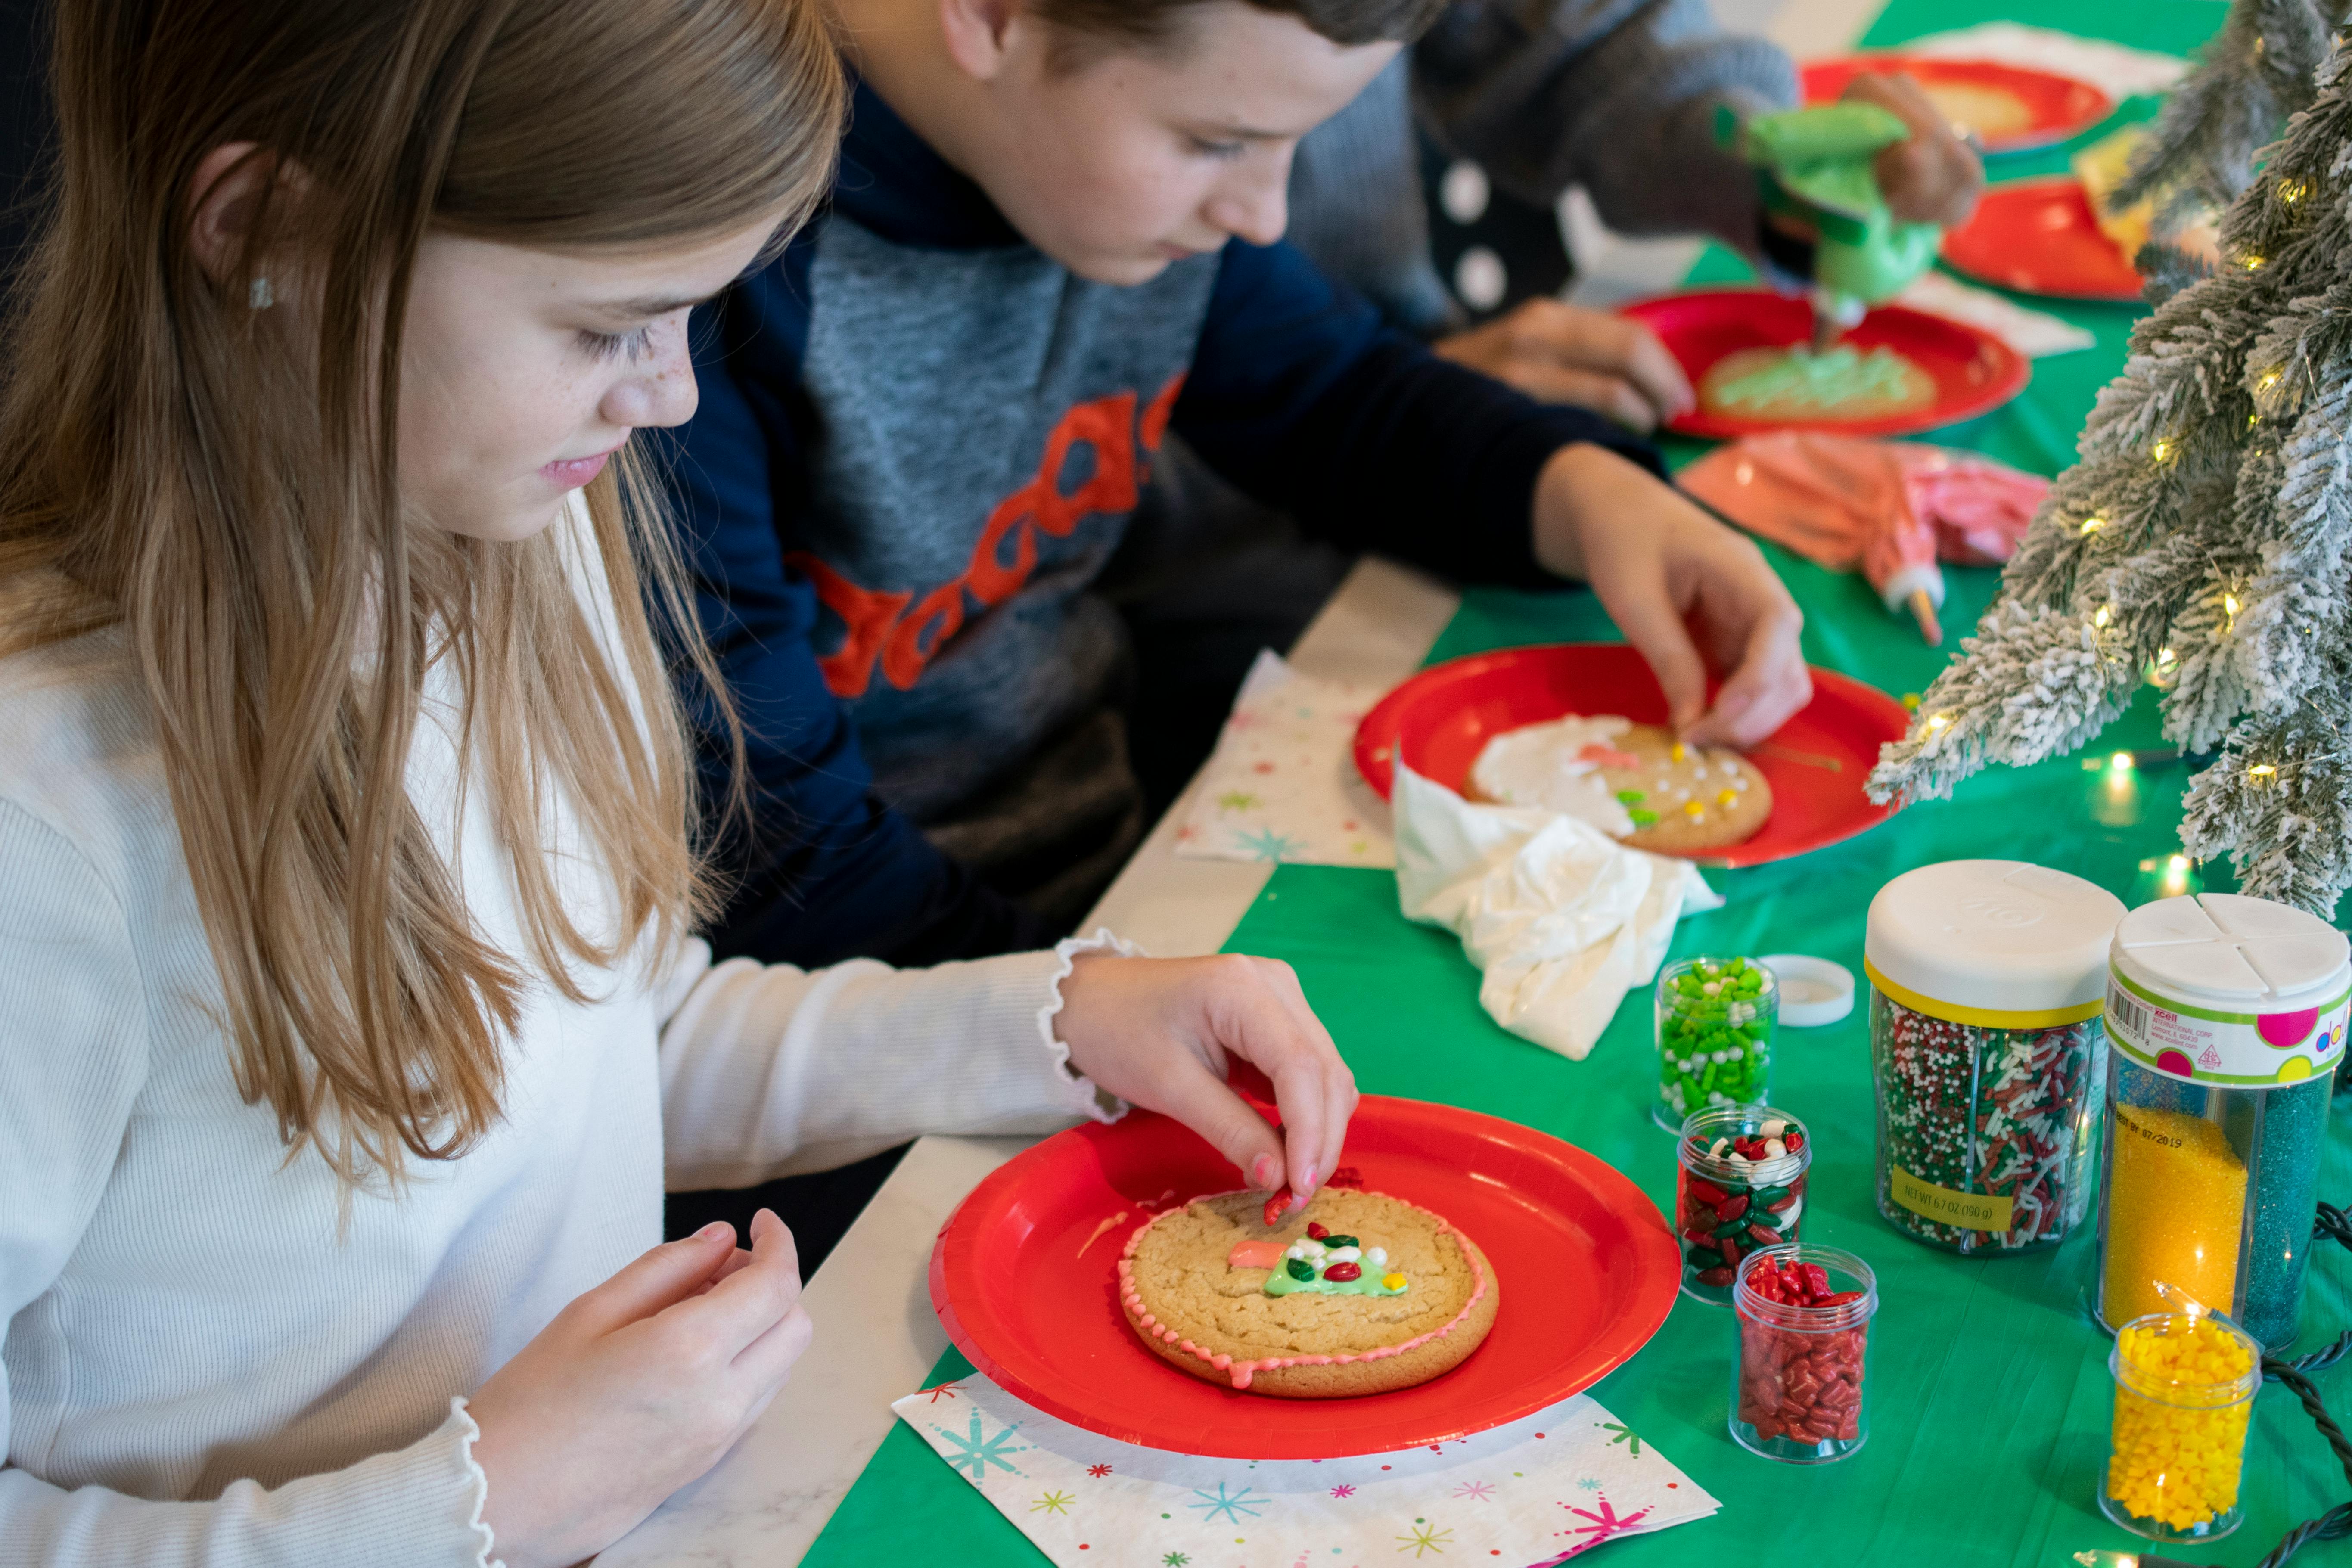 Some kids decorating Christmas Cookies at a table